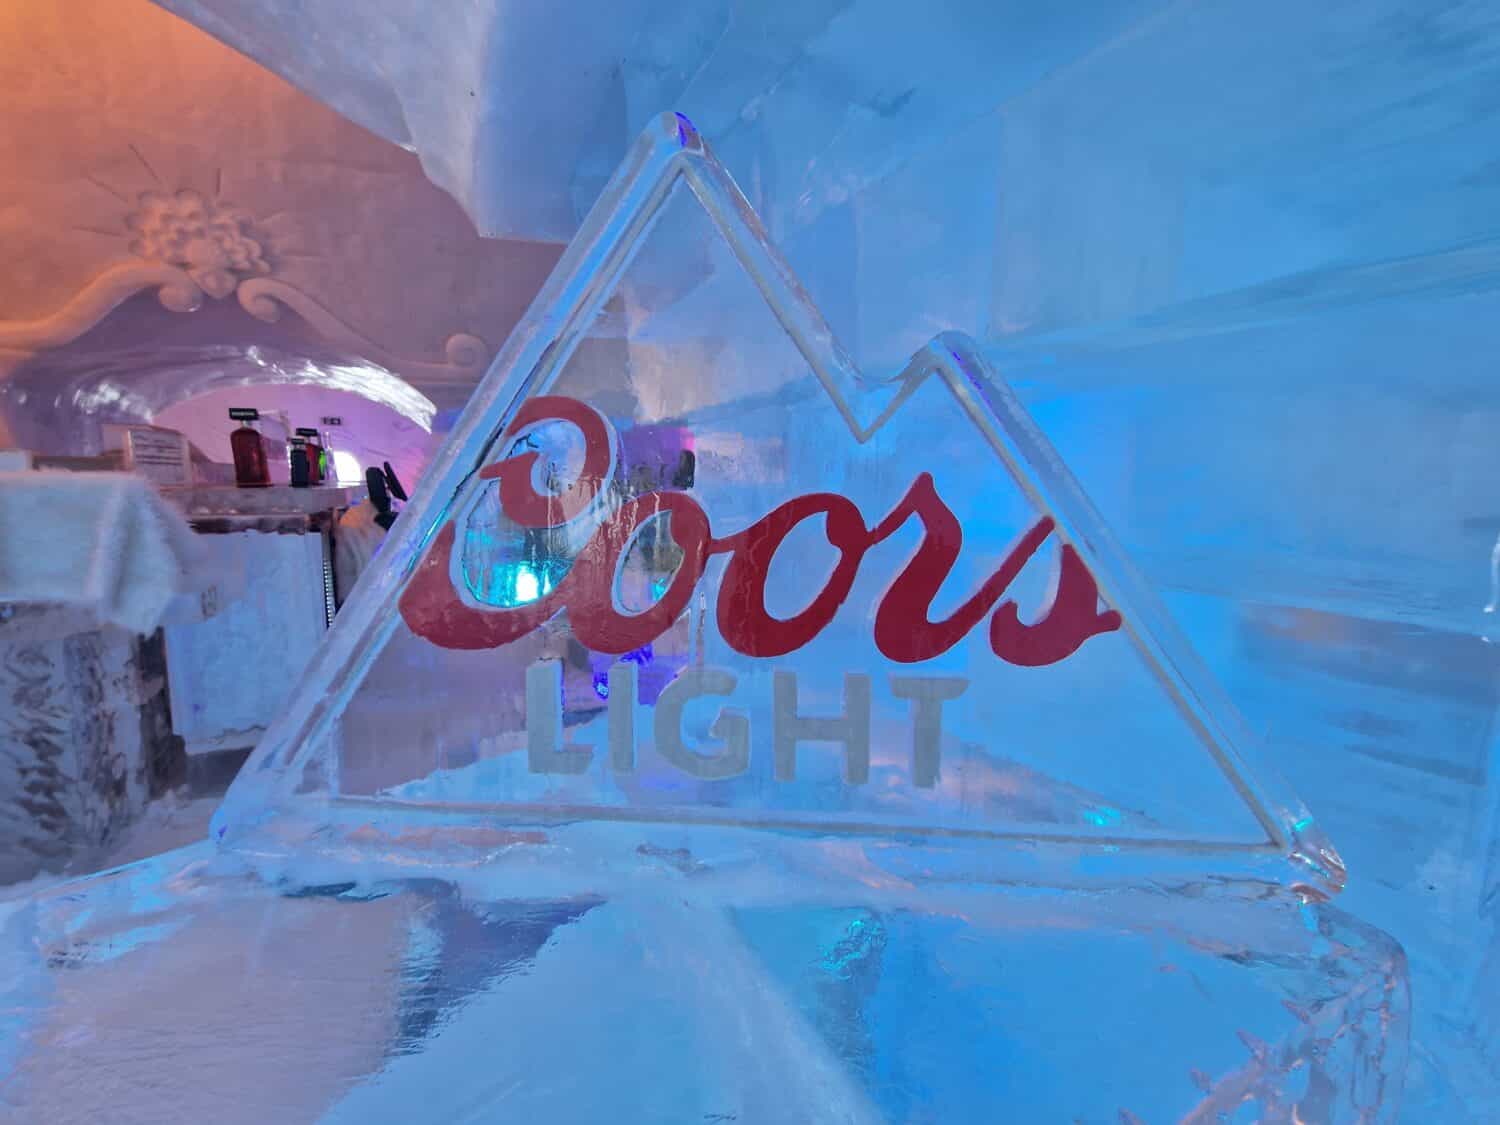 Coors Light Ice Sign at Ice Castle